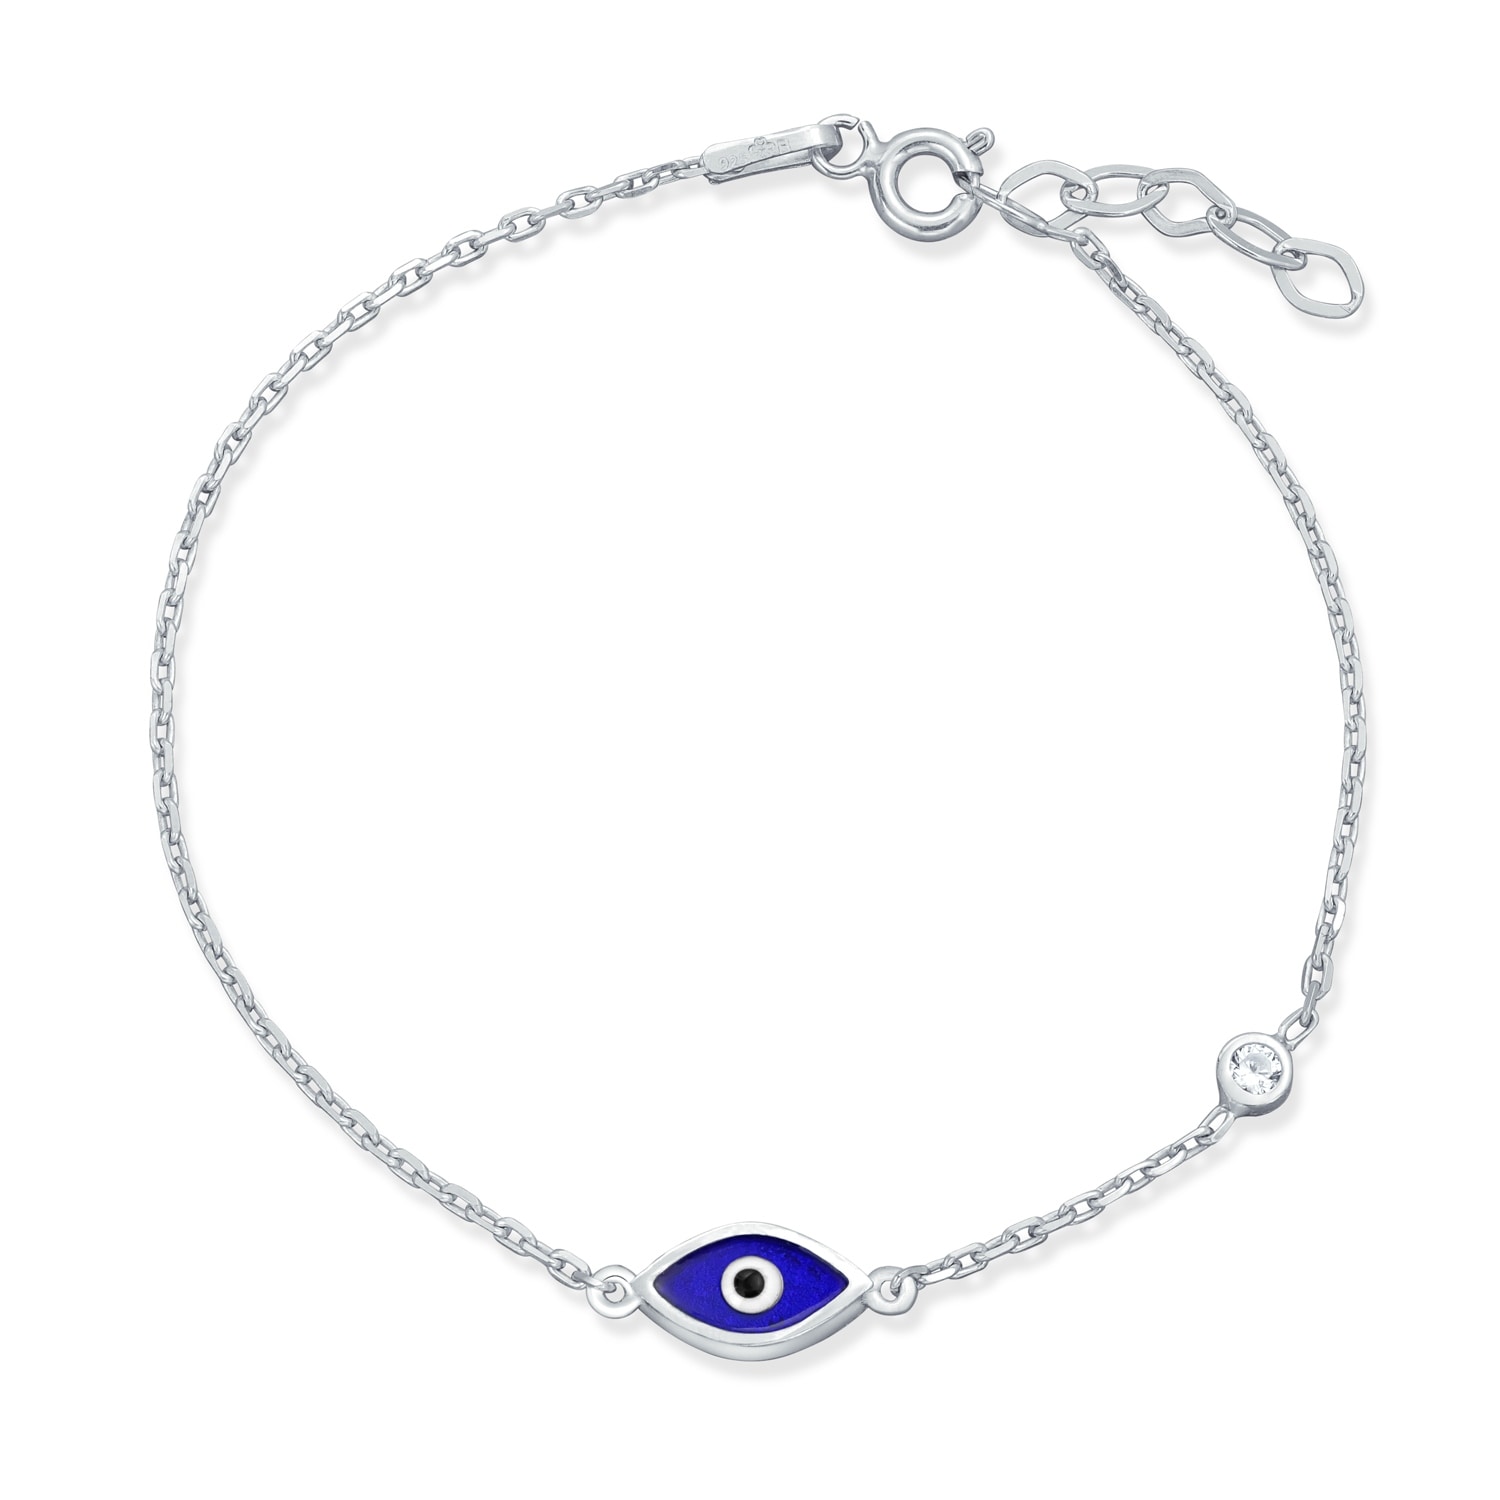 Blue Evil Eyes Link Bracelet in S925 Sterling Silver with Cubic Zirconia Dainty Adjustable Link Lobster Claw Clasp Chain Jewelry Gift for Women Girls